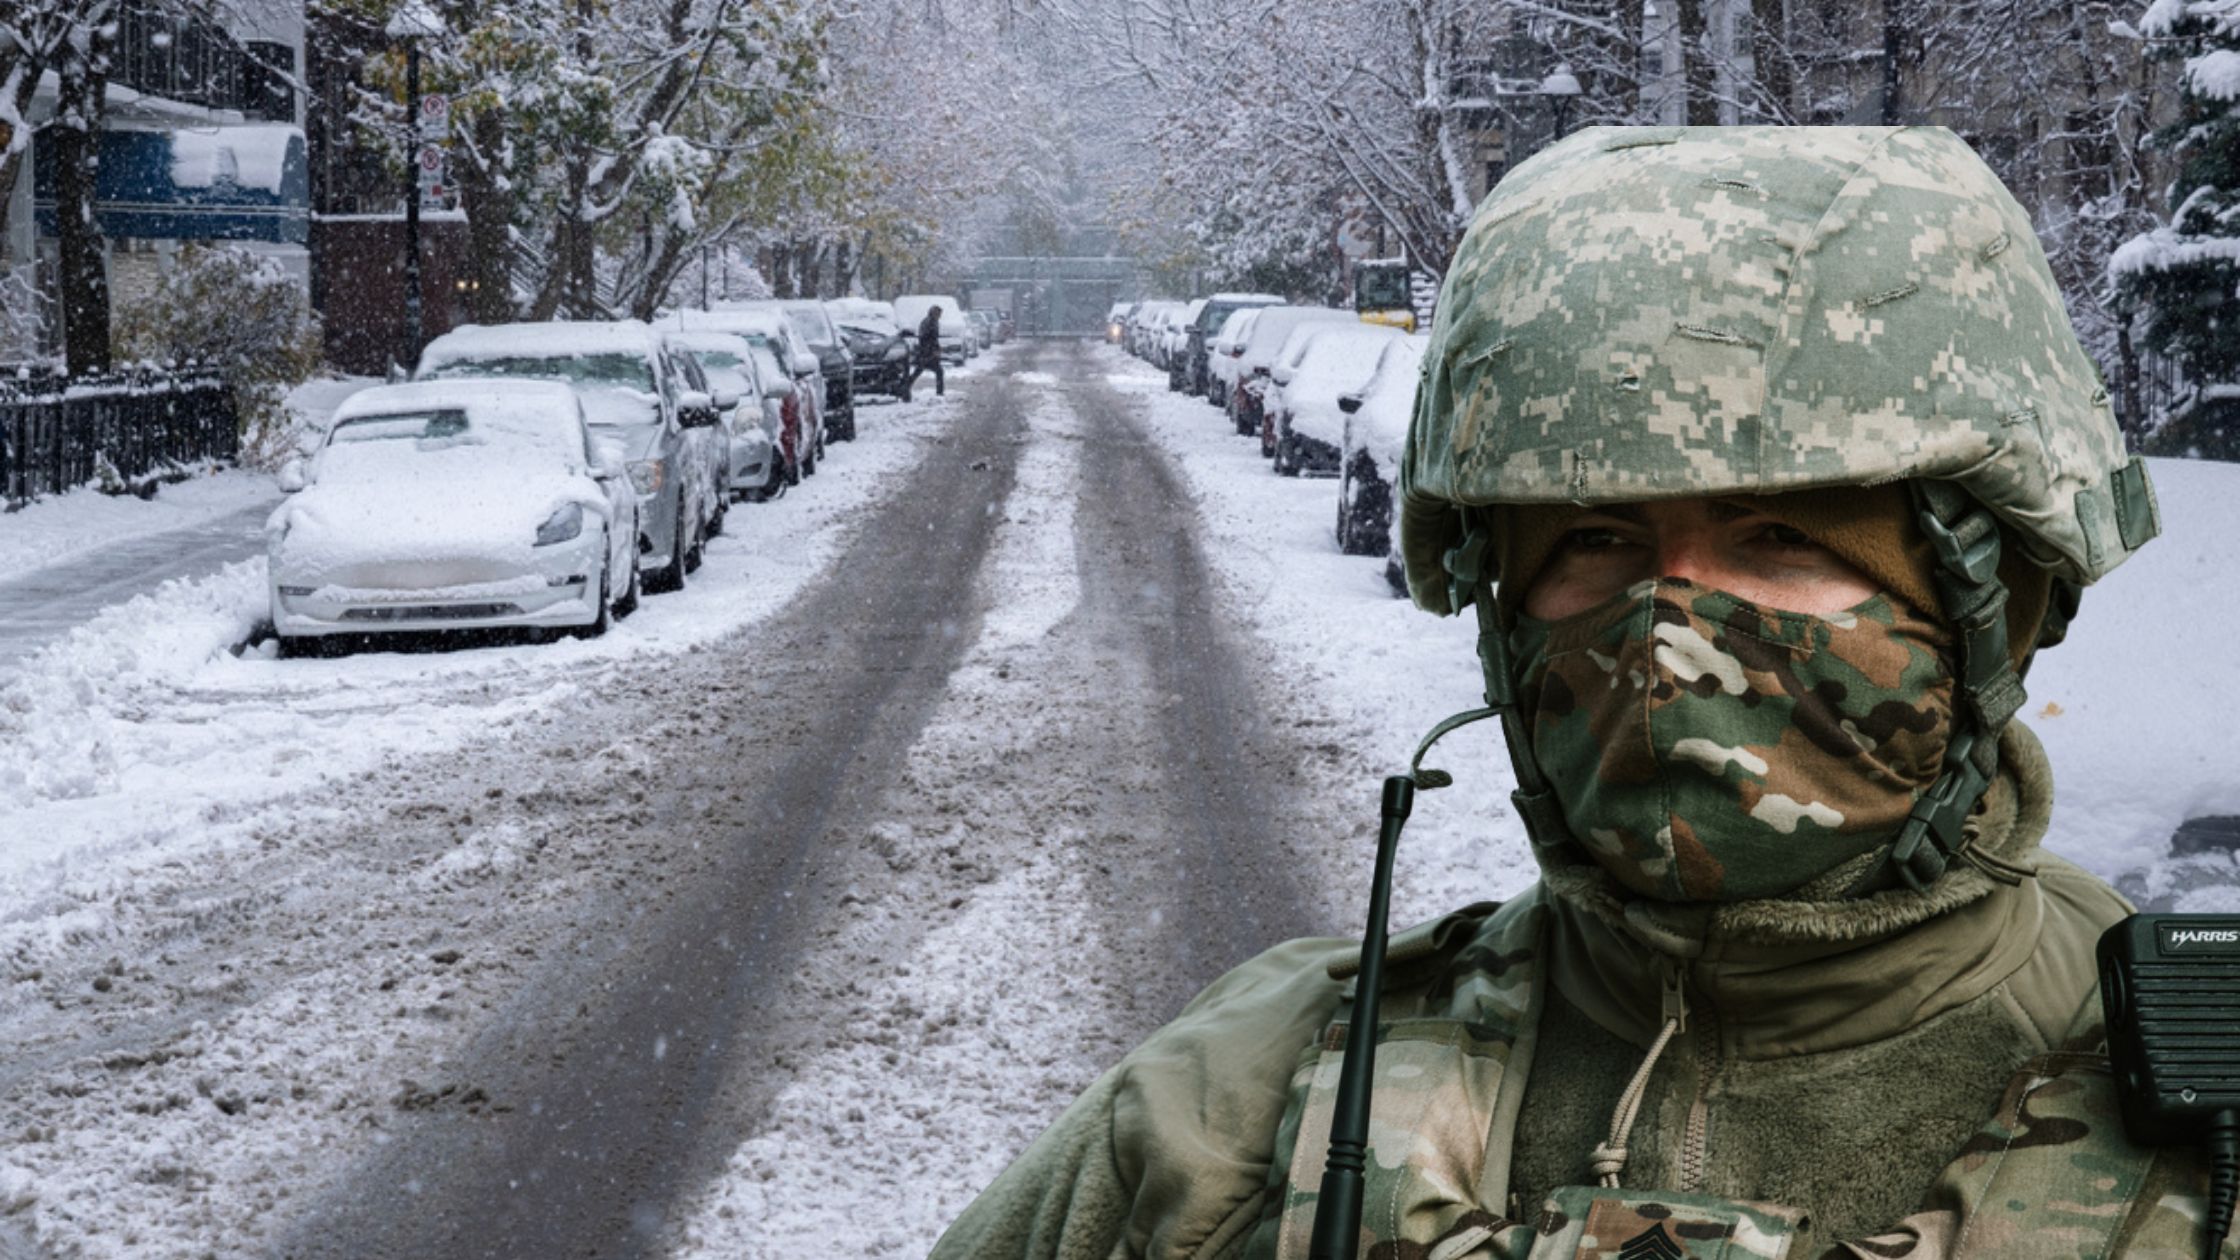 UPDATE: National Guard going door-to-door in Buffalo checking homes for blizzard victims